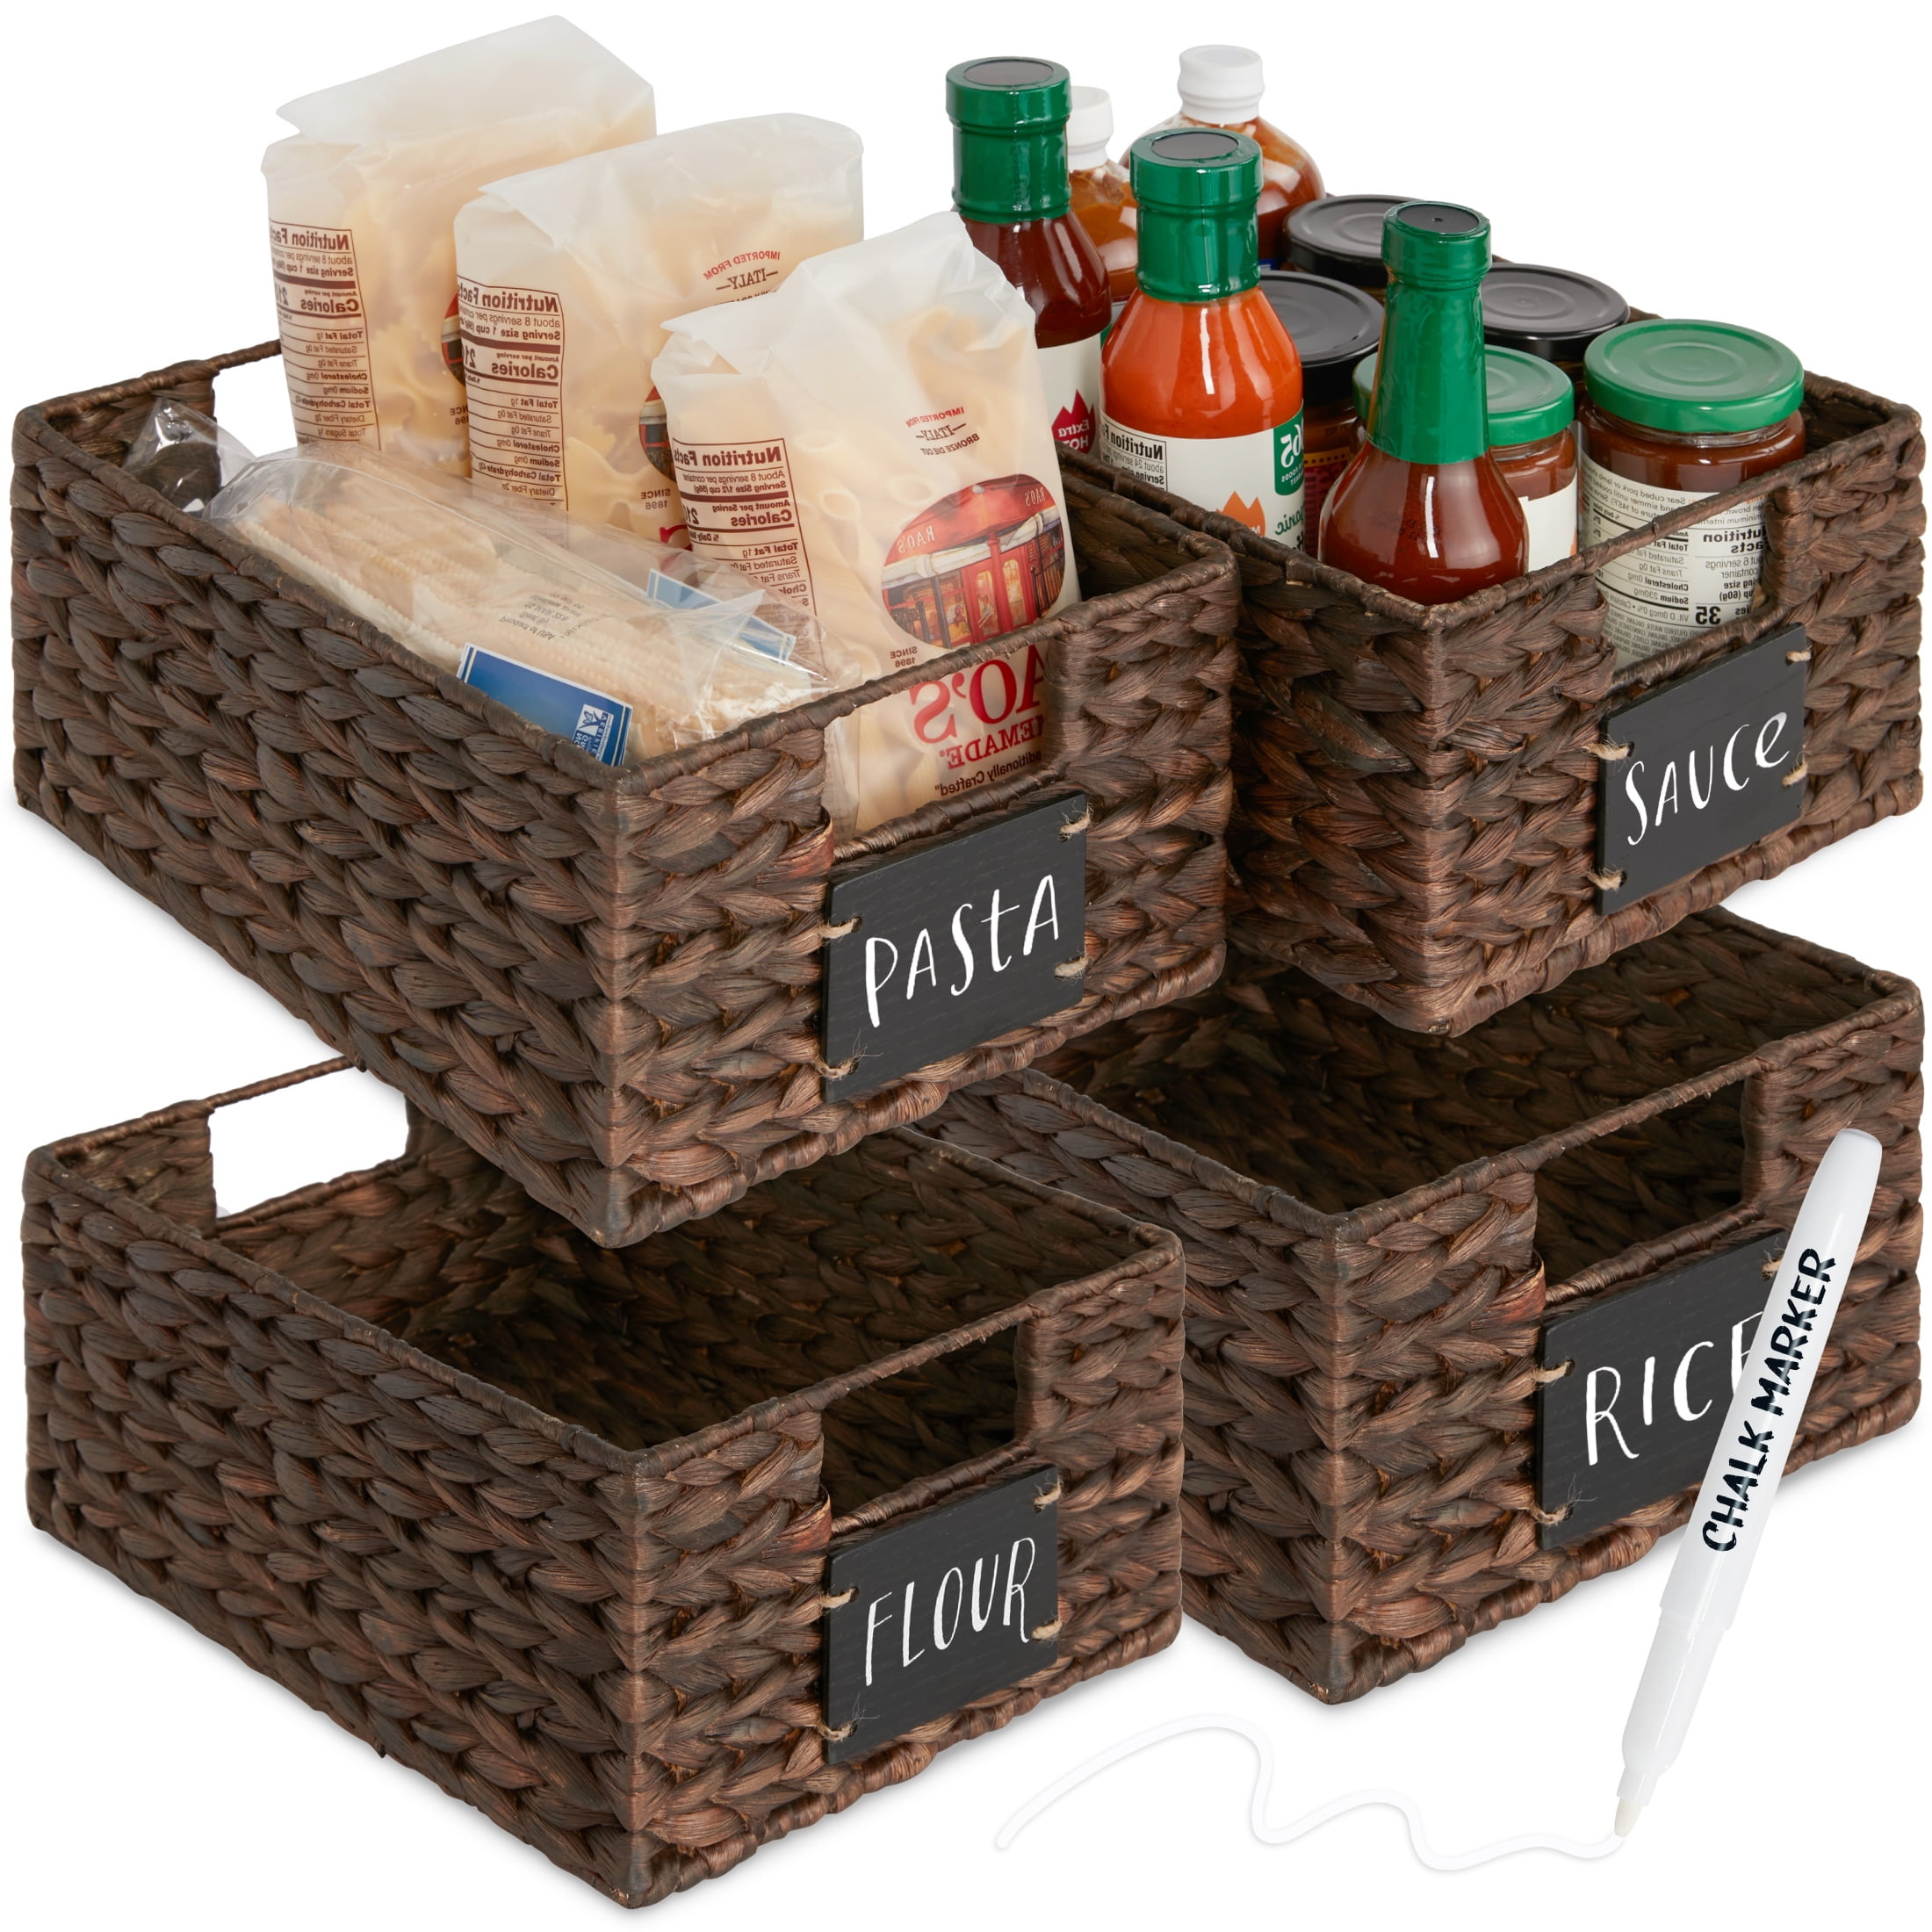 Best Choice Products 13x13in Hyacinth Storage Baskets, Set of 5  Multipurpose Collapsible Organizers - Black